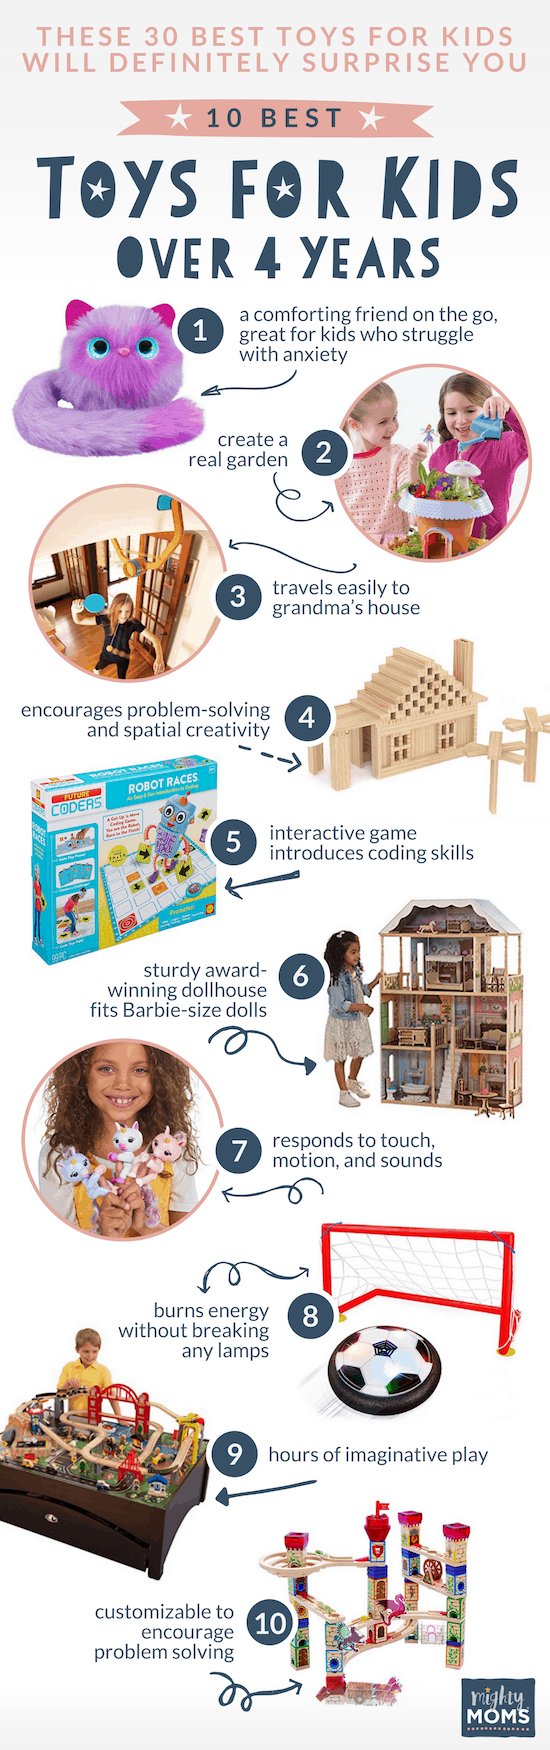 Best Toys for Kids Over 4 Years - MightyMoms.club